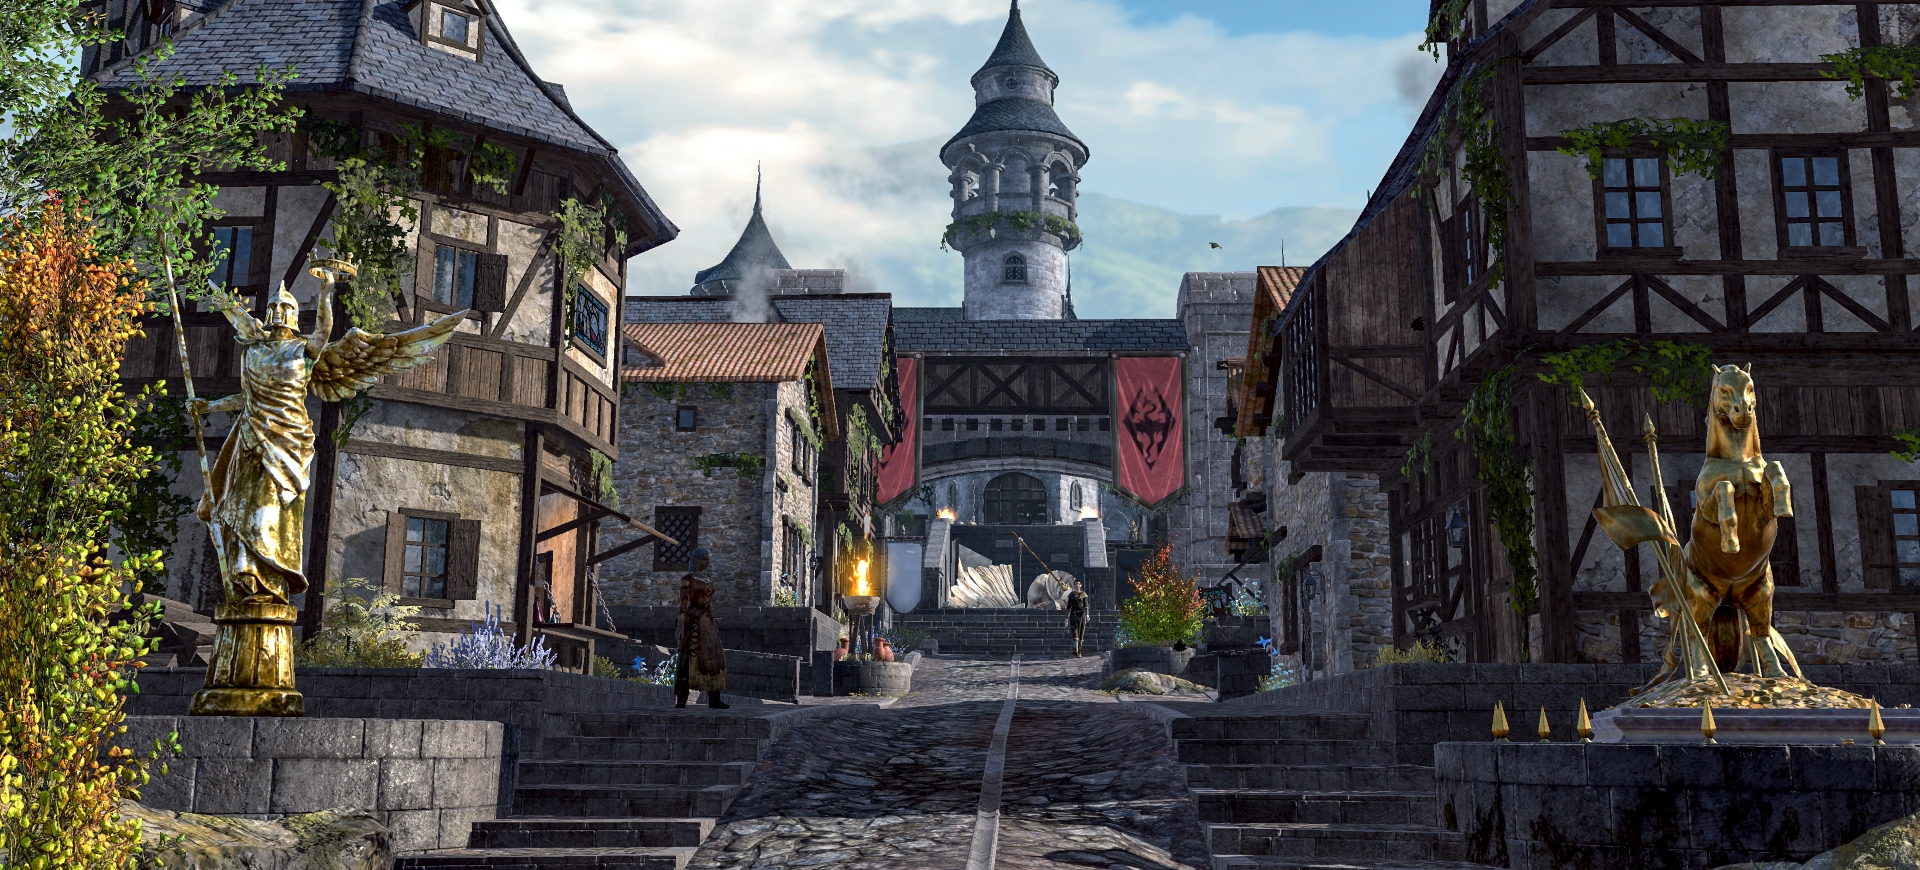 The Elder Scrolls: Blades 1.6 Update Includes Custom Loadouts And More